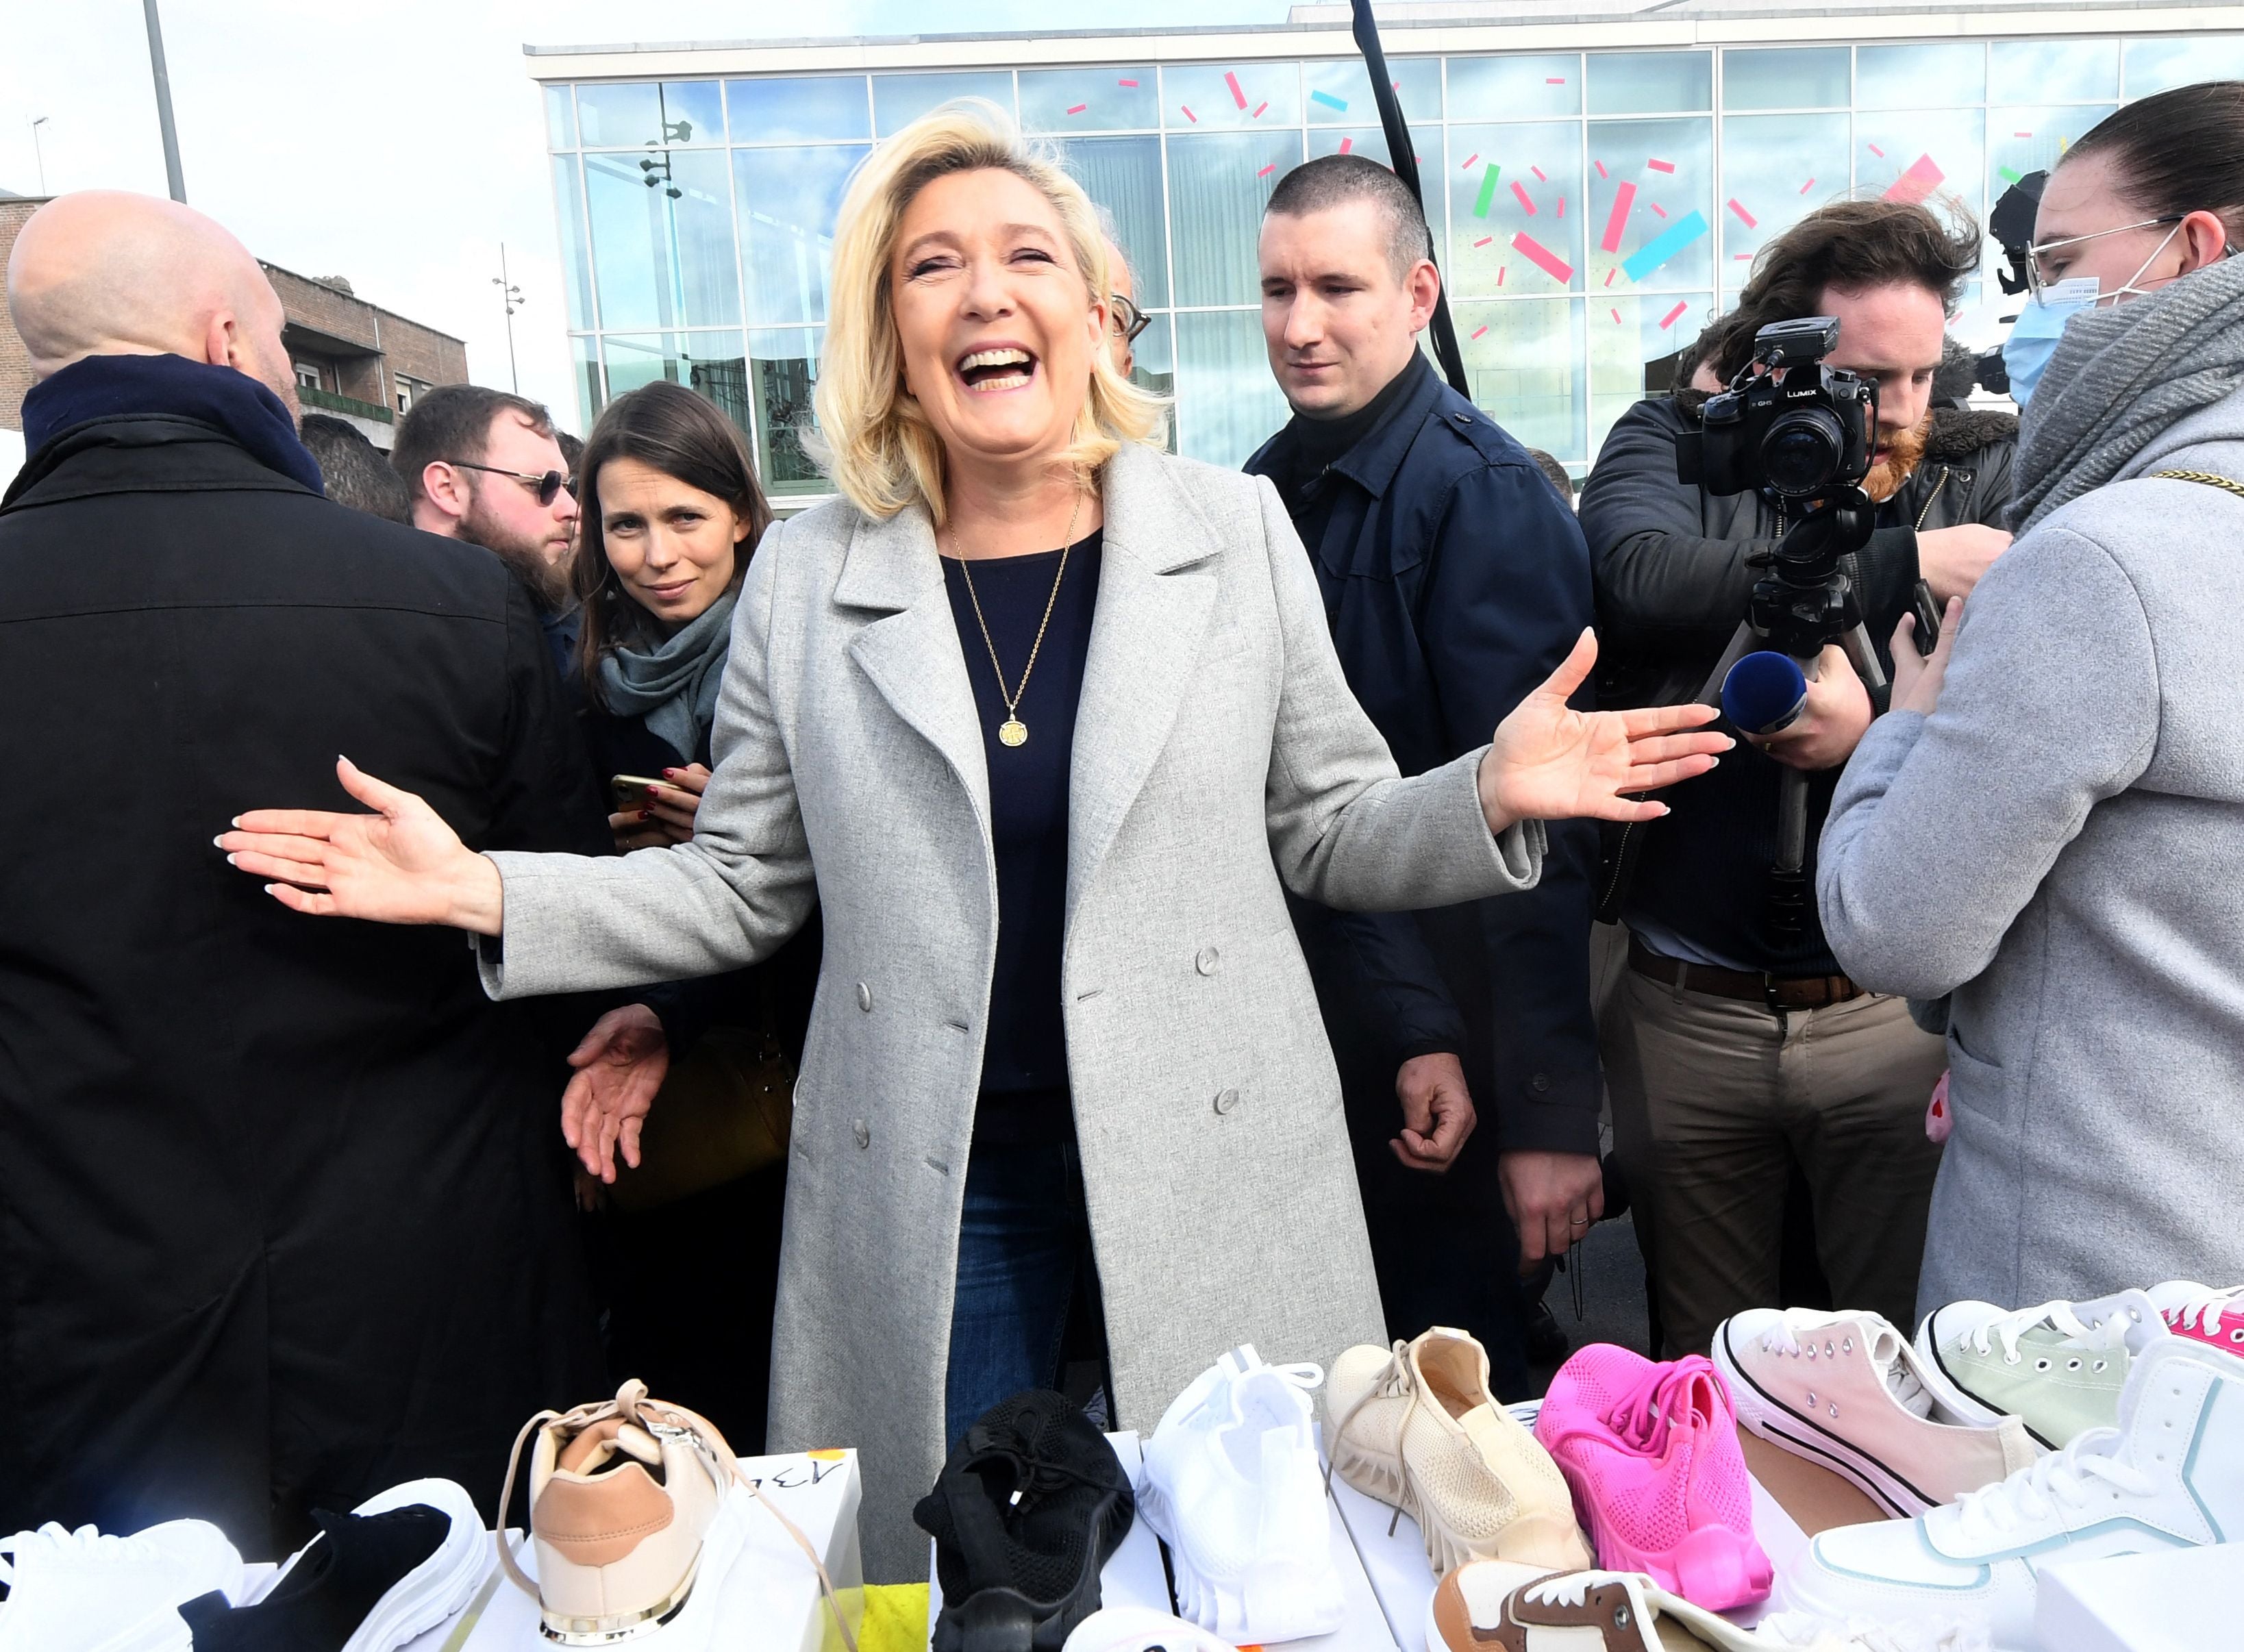 Marine Le Pen poses for a photo during a campaign visit to a market in Dunkirk, northern France, 12 March 2022